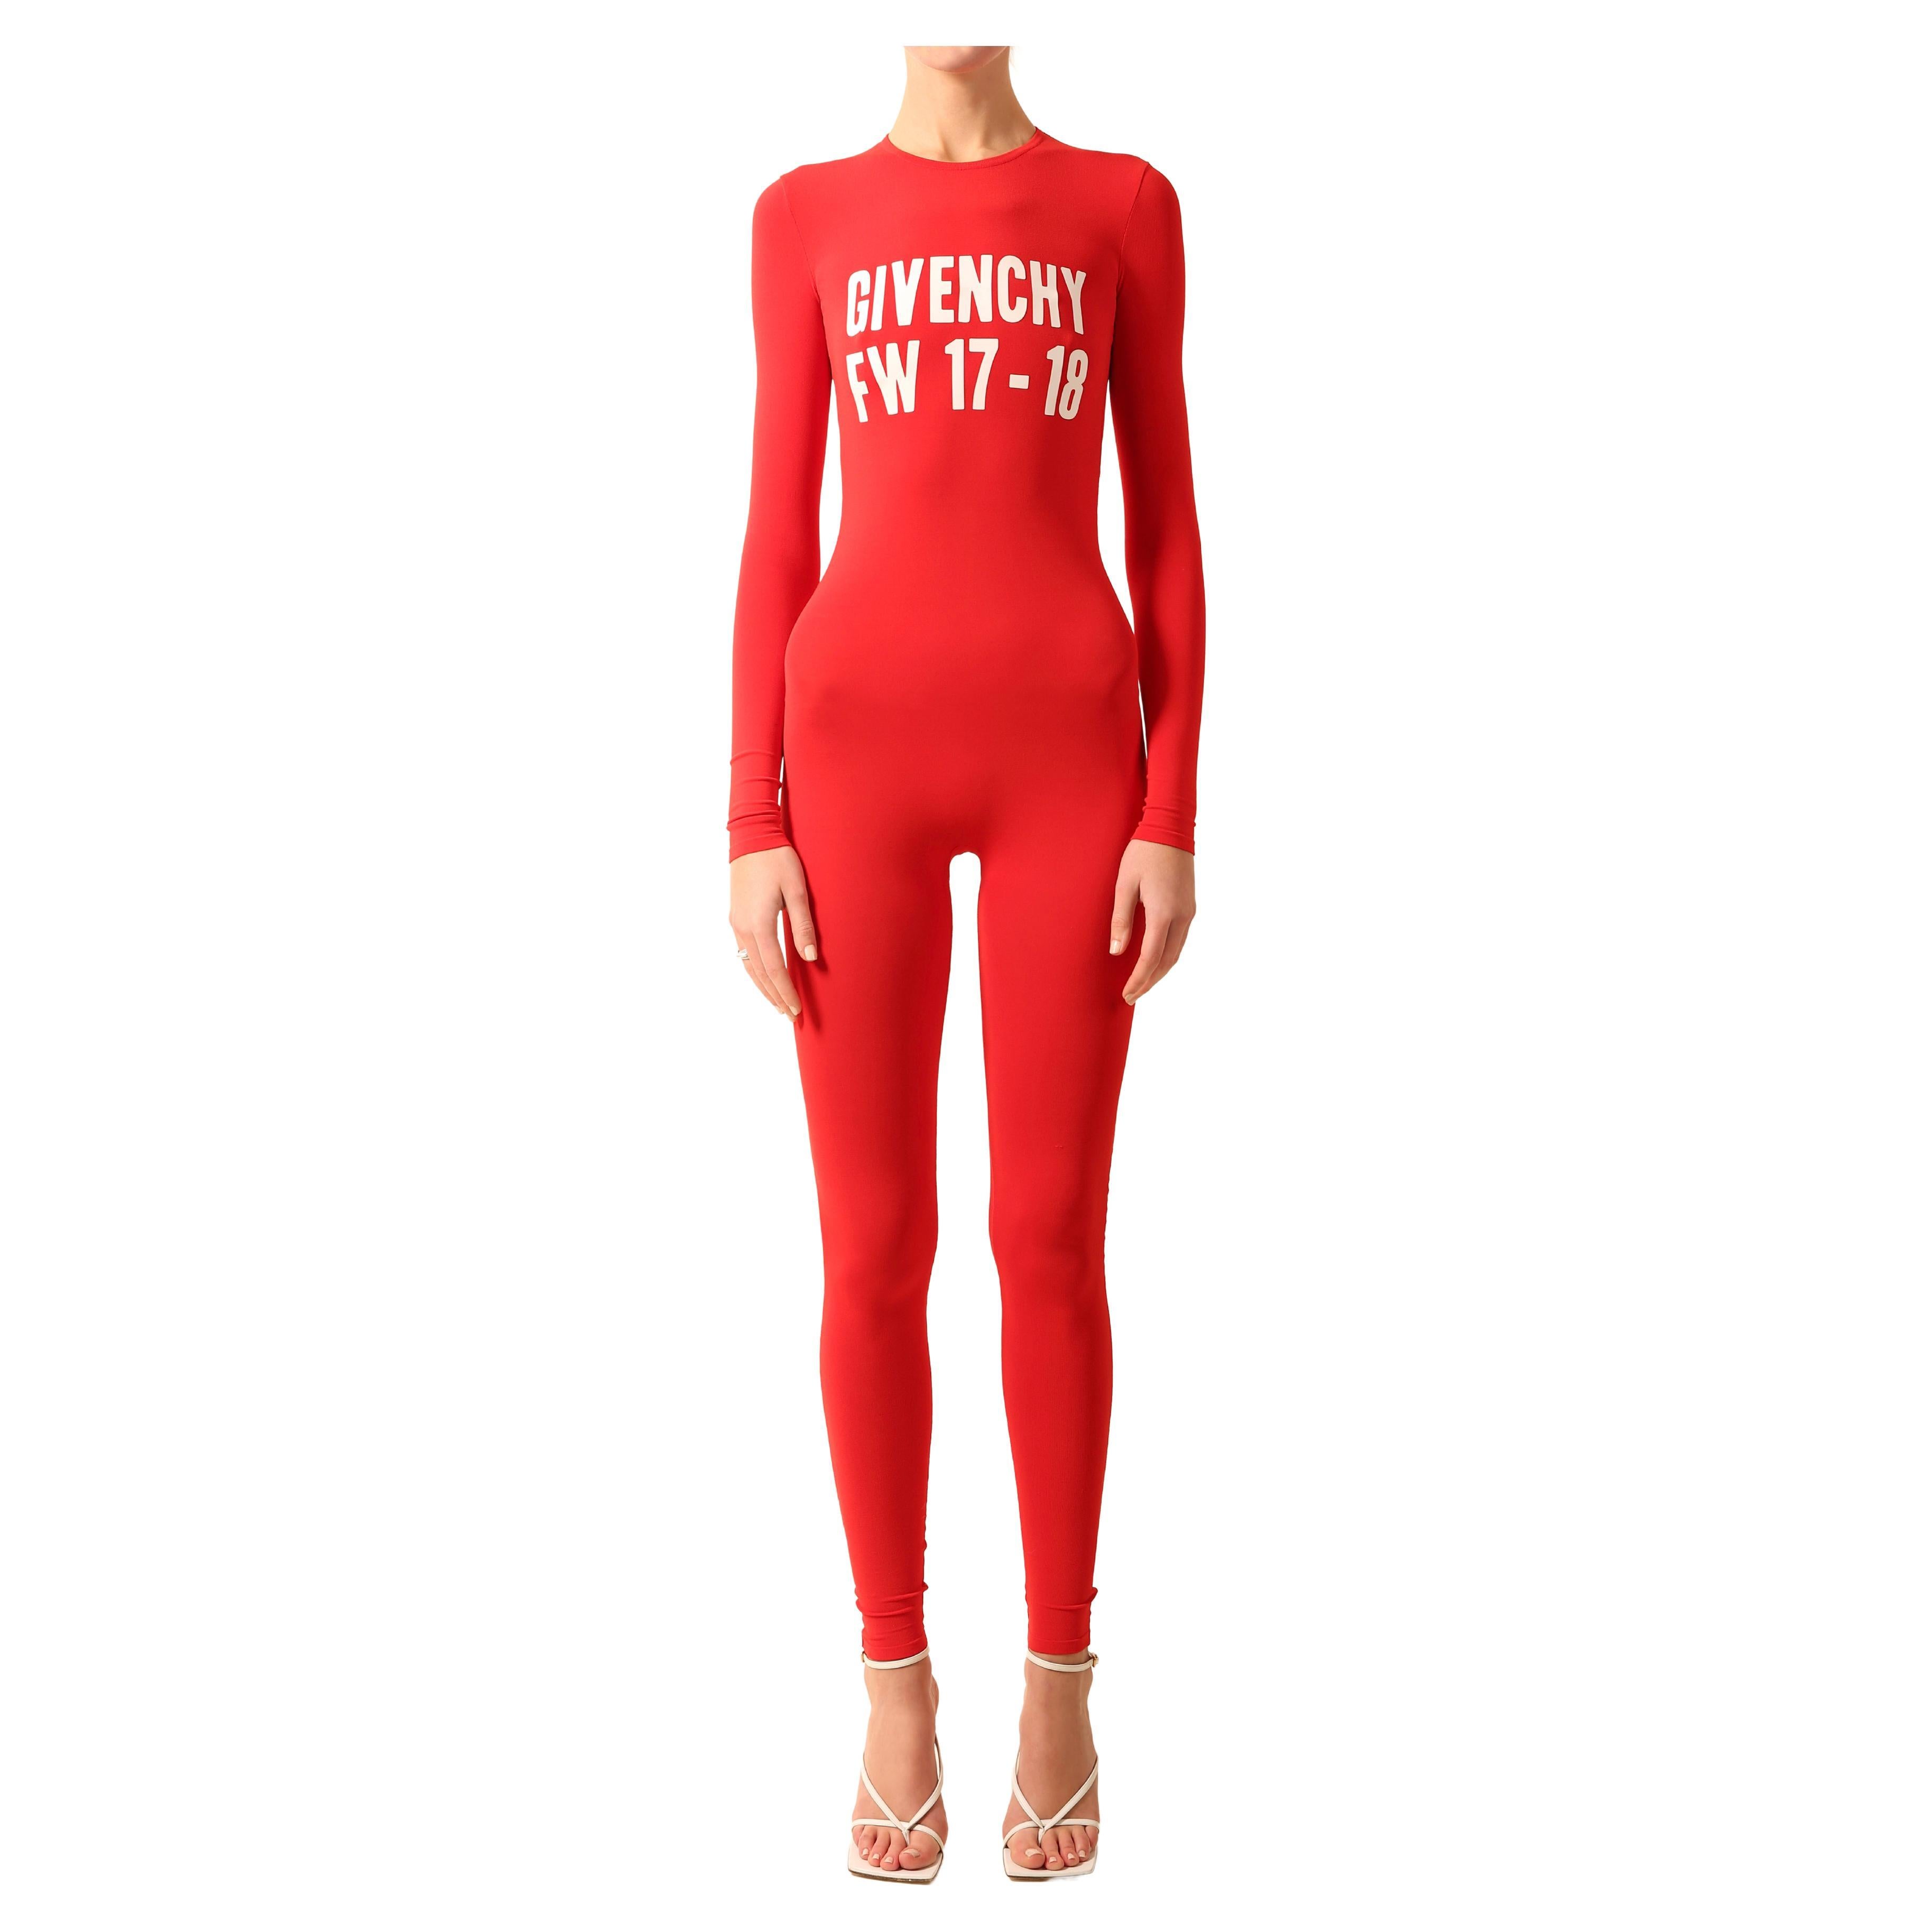 Givenchy Fall 2017 red white logo print stretch bodysuit catsuit jumpsuit XS